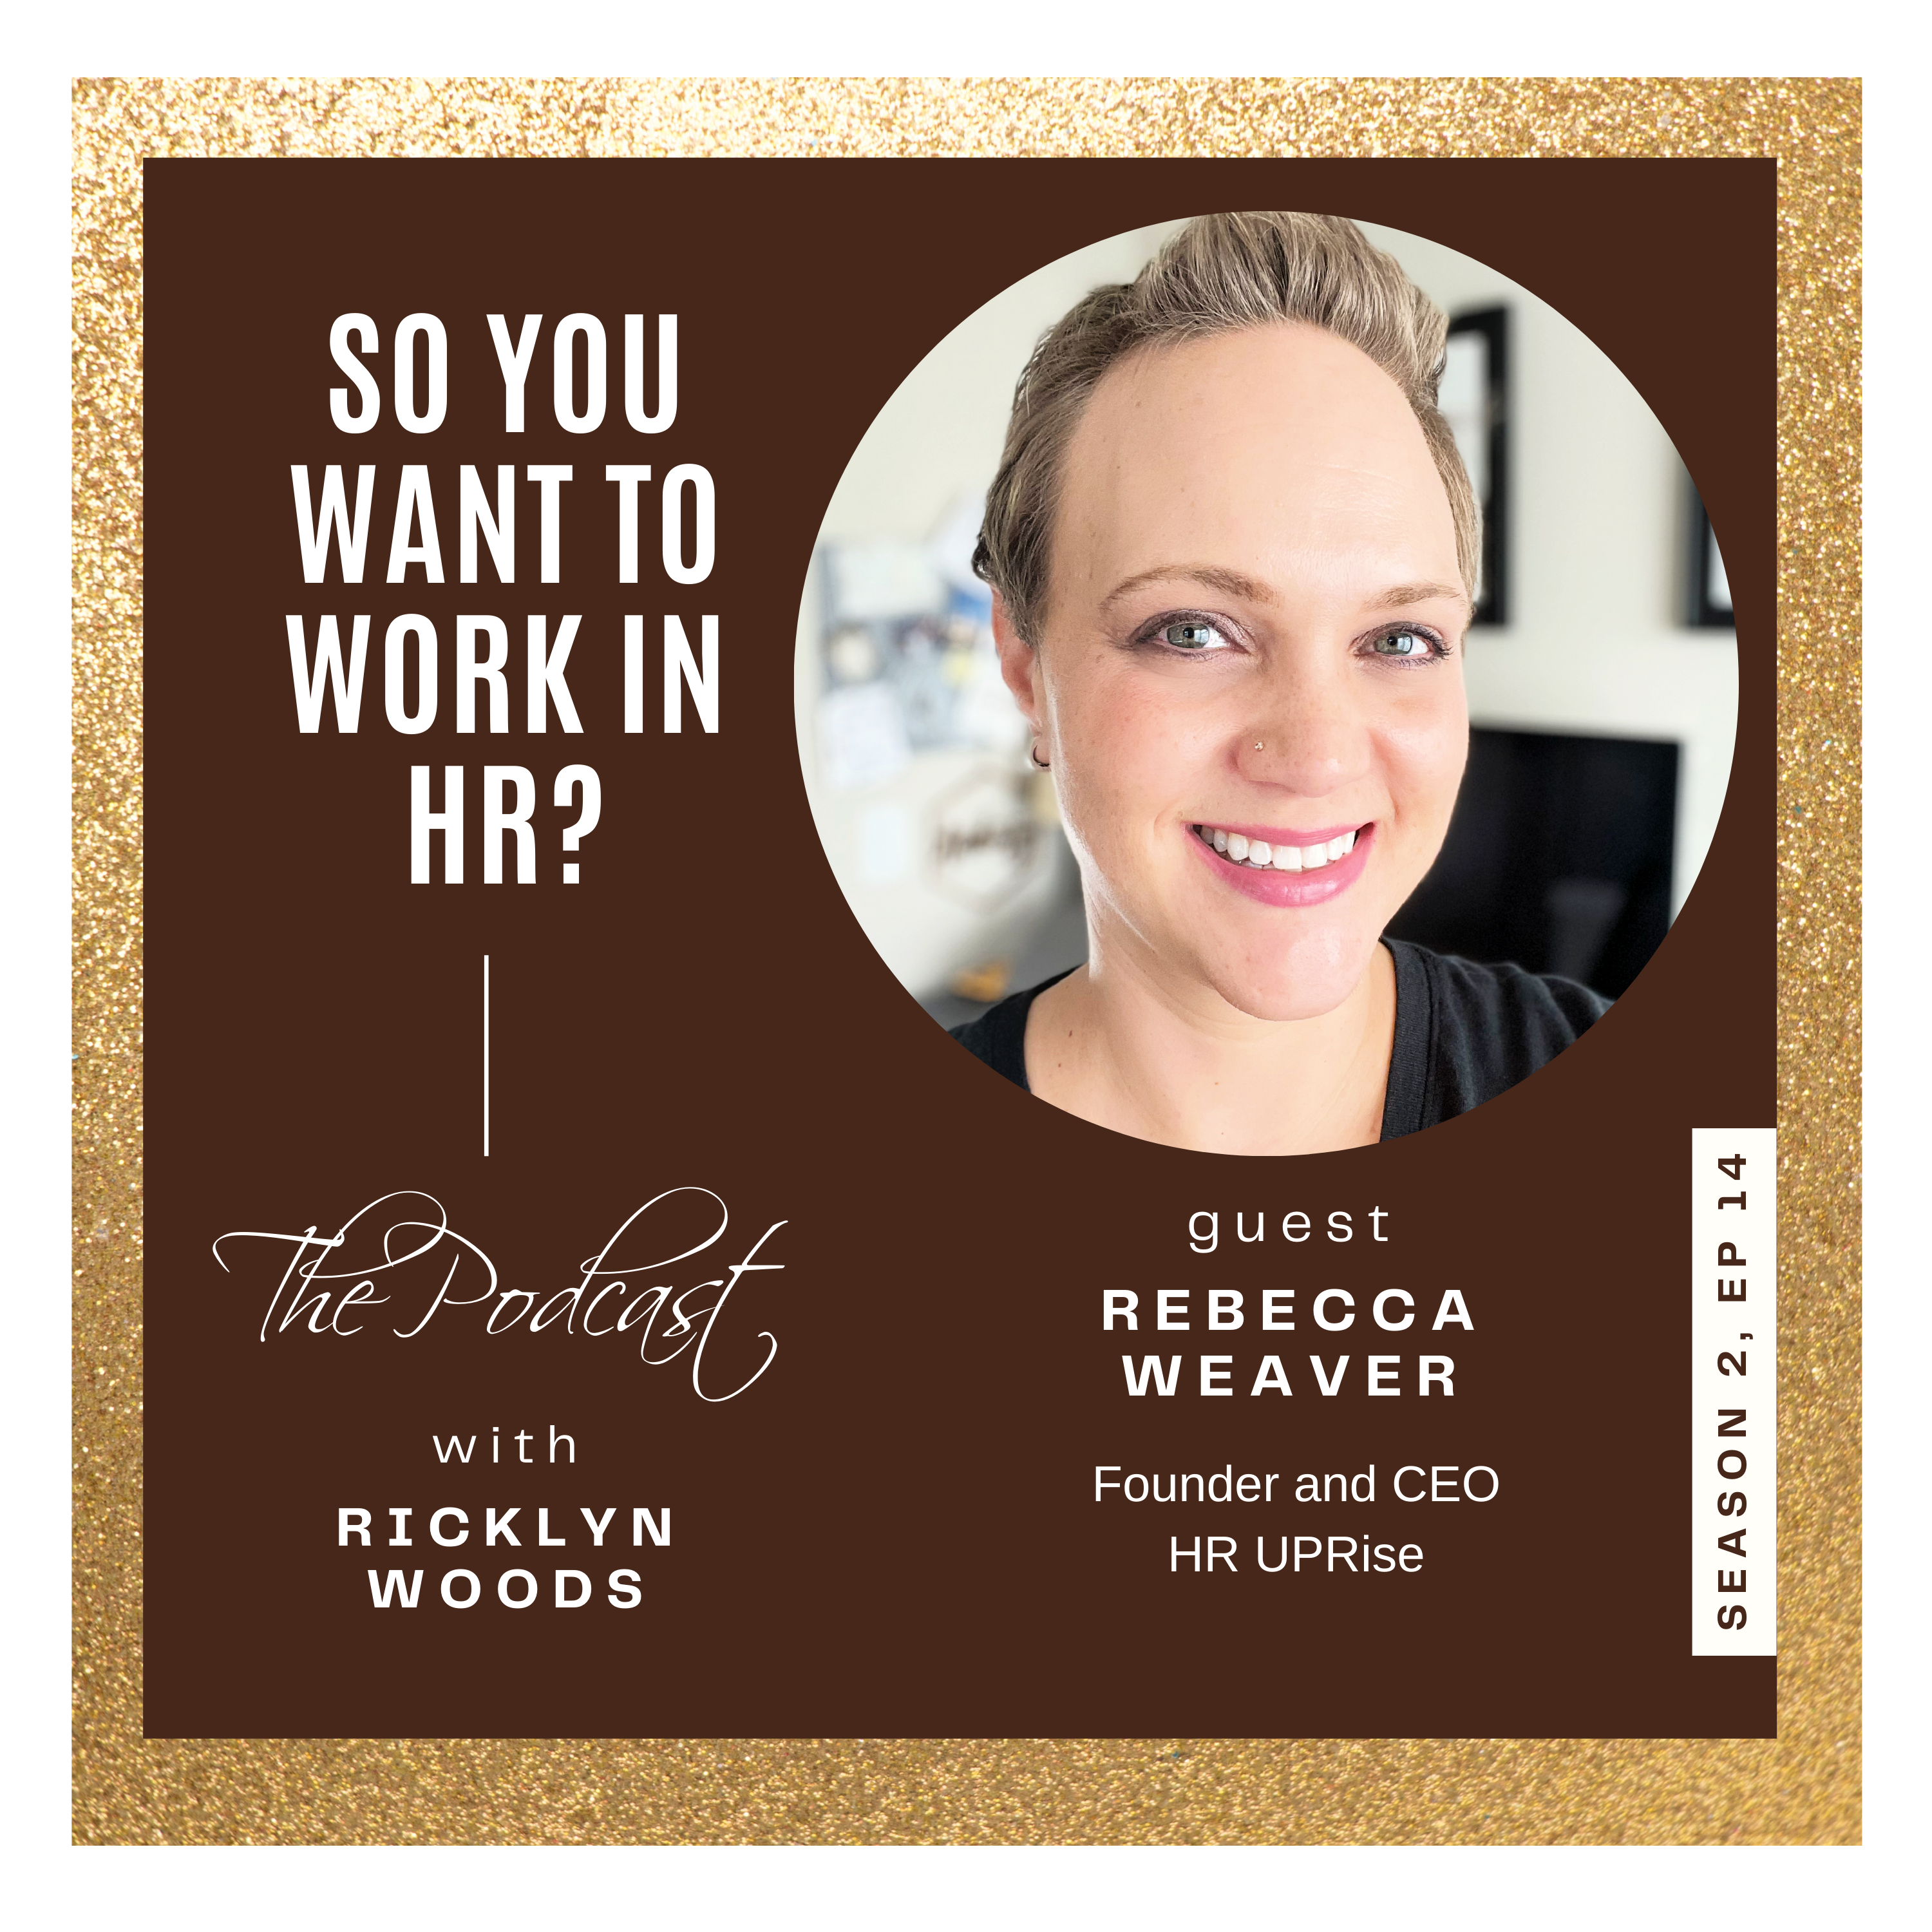 The So You Want to Work in HR Logo - a gold frame surrounding a brown box - featuring Rebecca Weaver.